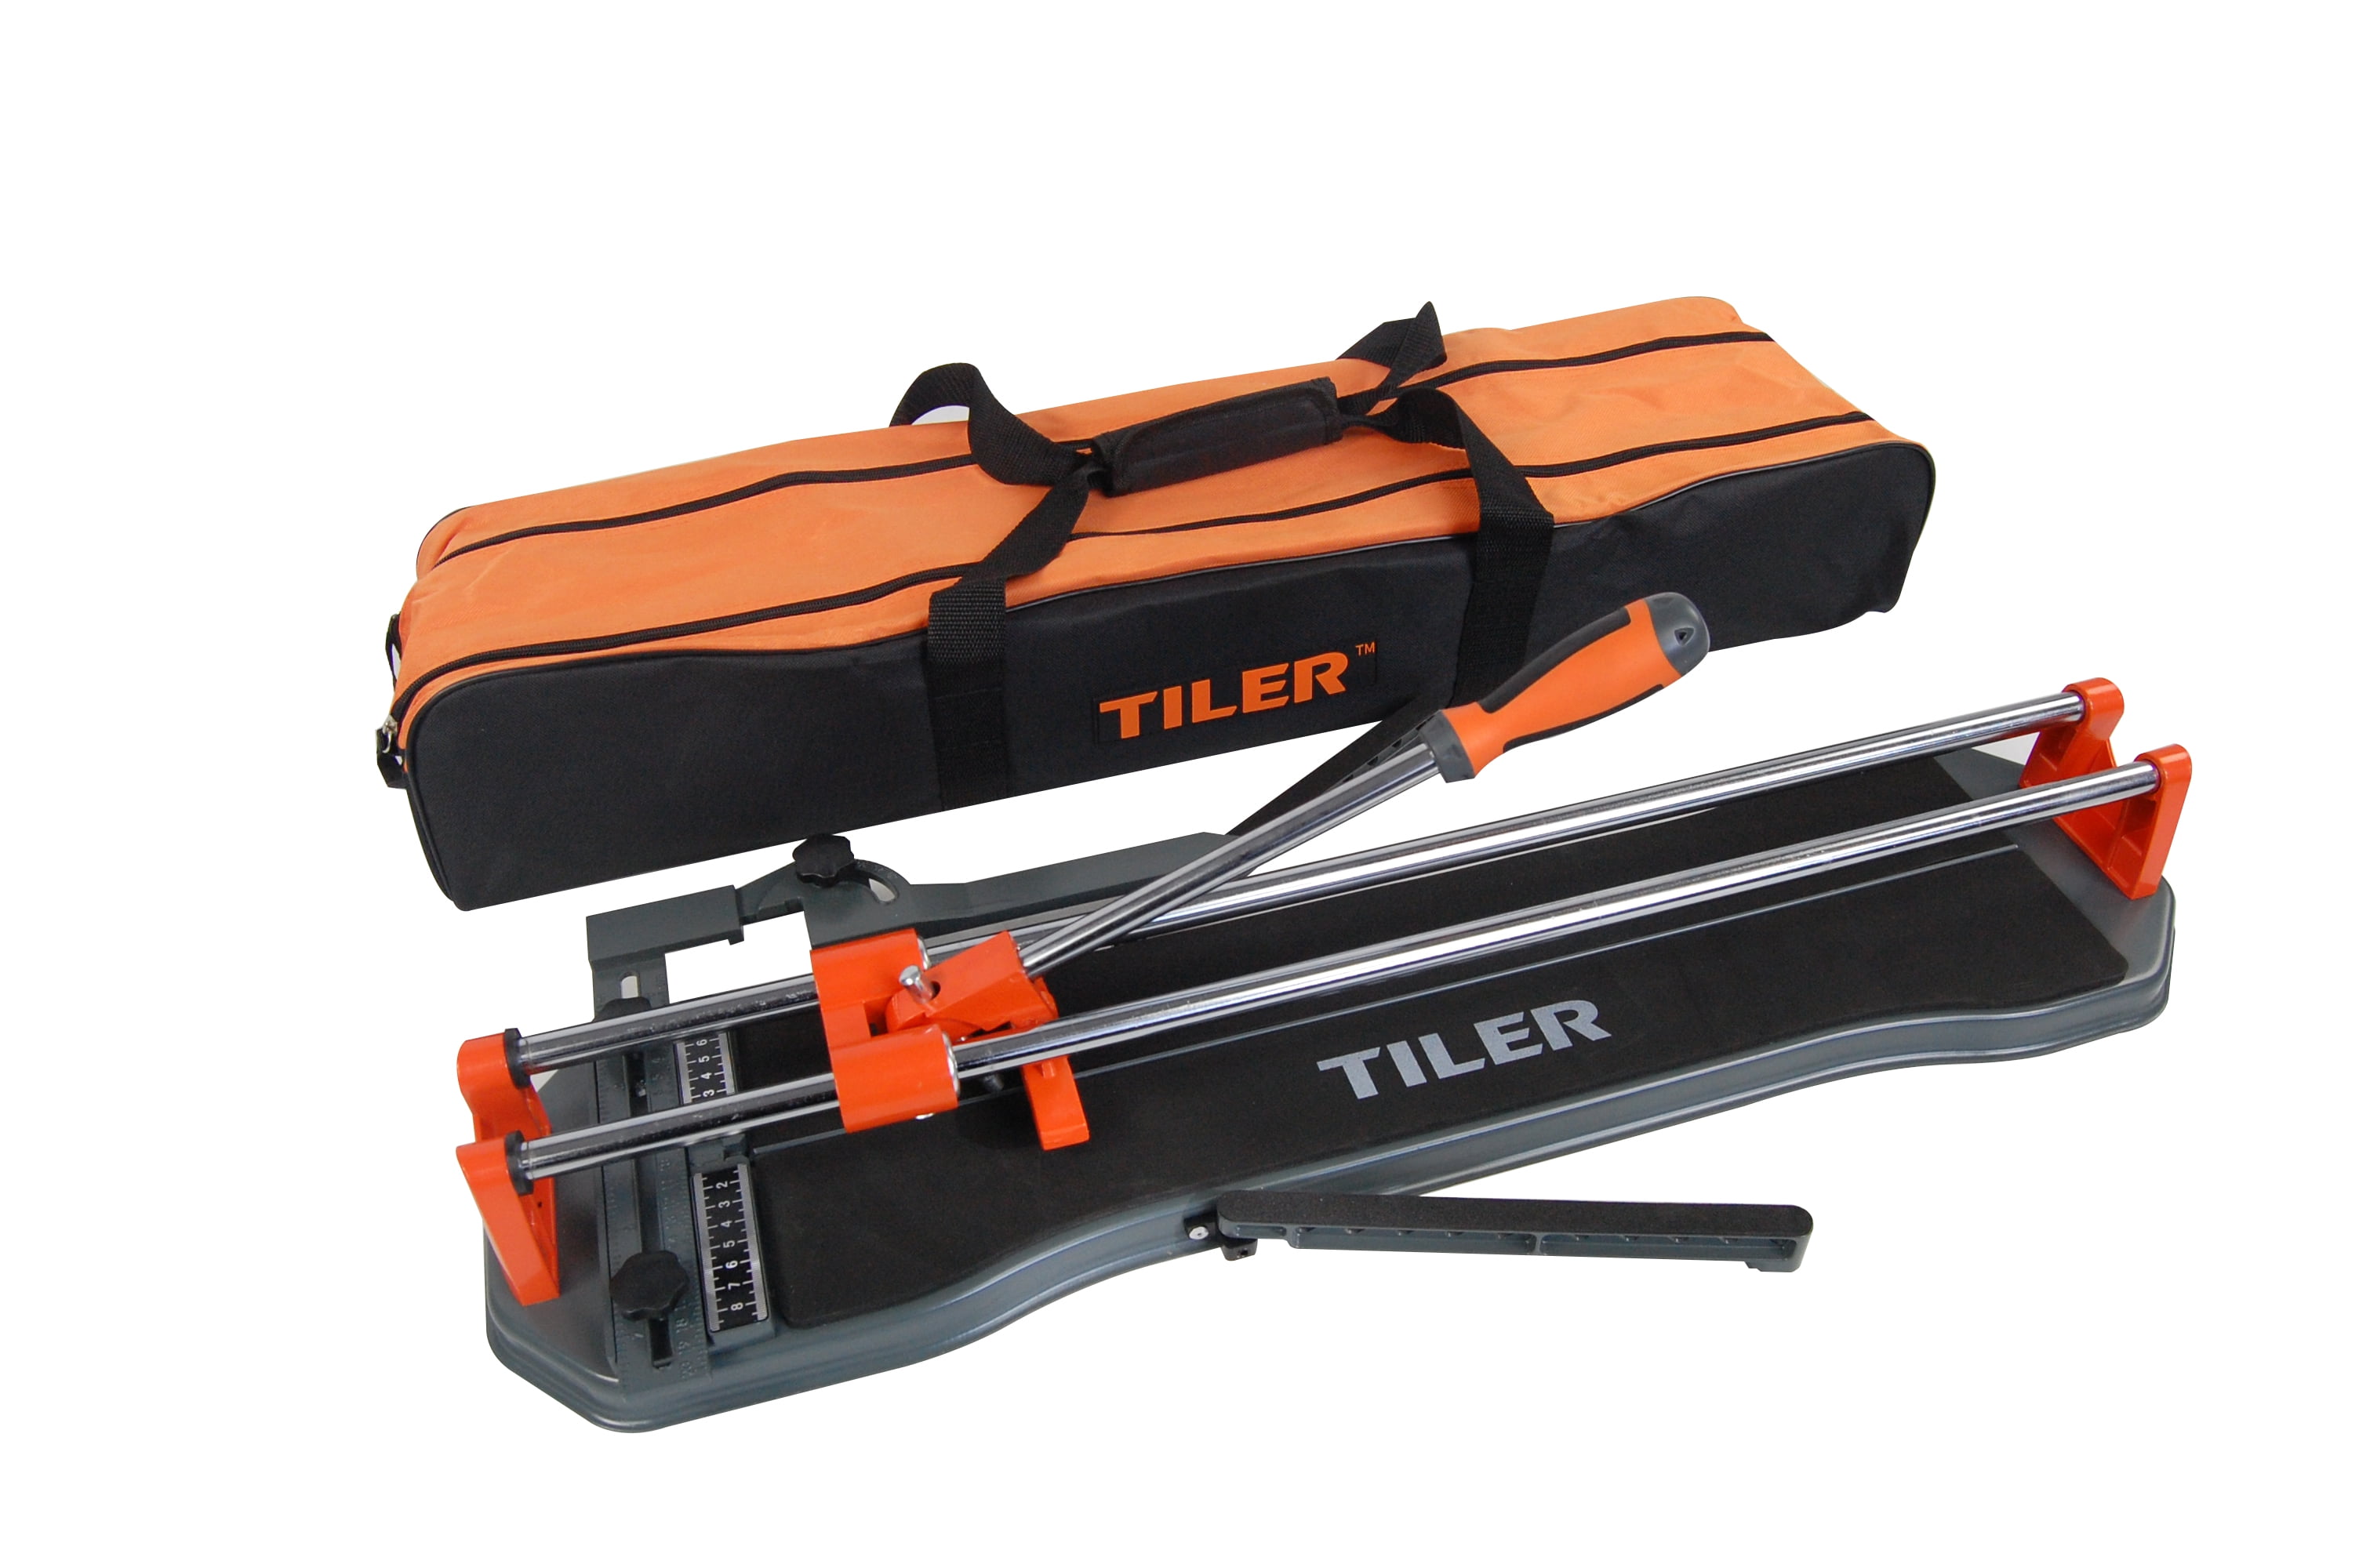 TFCFL Manual Tile Cutter US Stock 24in Professional Porcelain Ceramic Cutting Tool Kit Manual Pull Handle Cutting 20mm Sawing Depth 